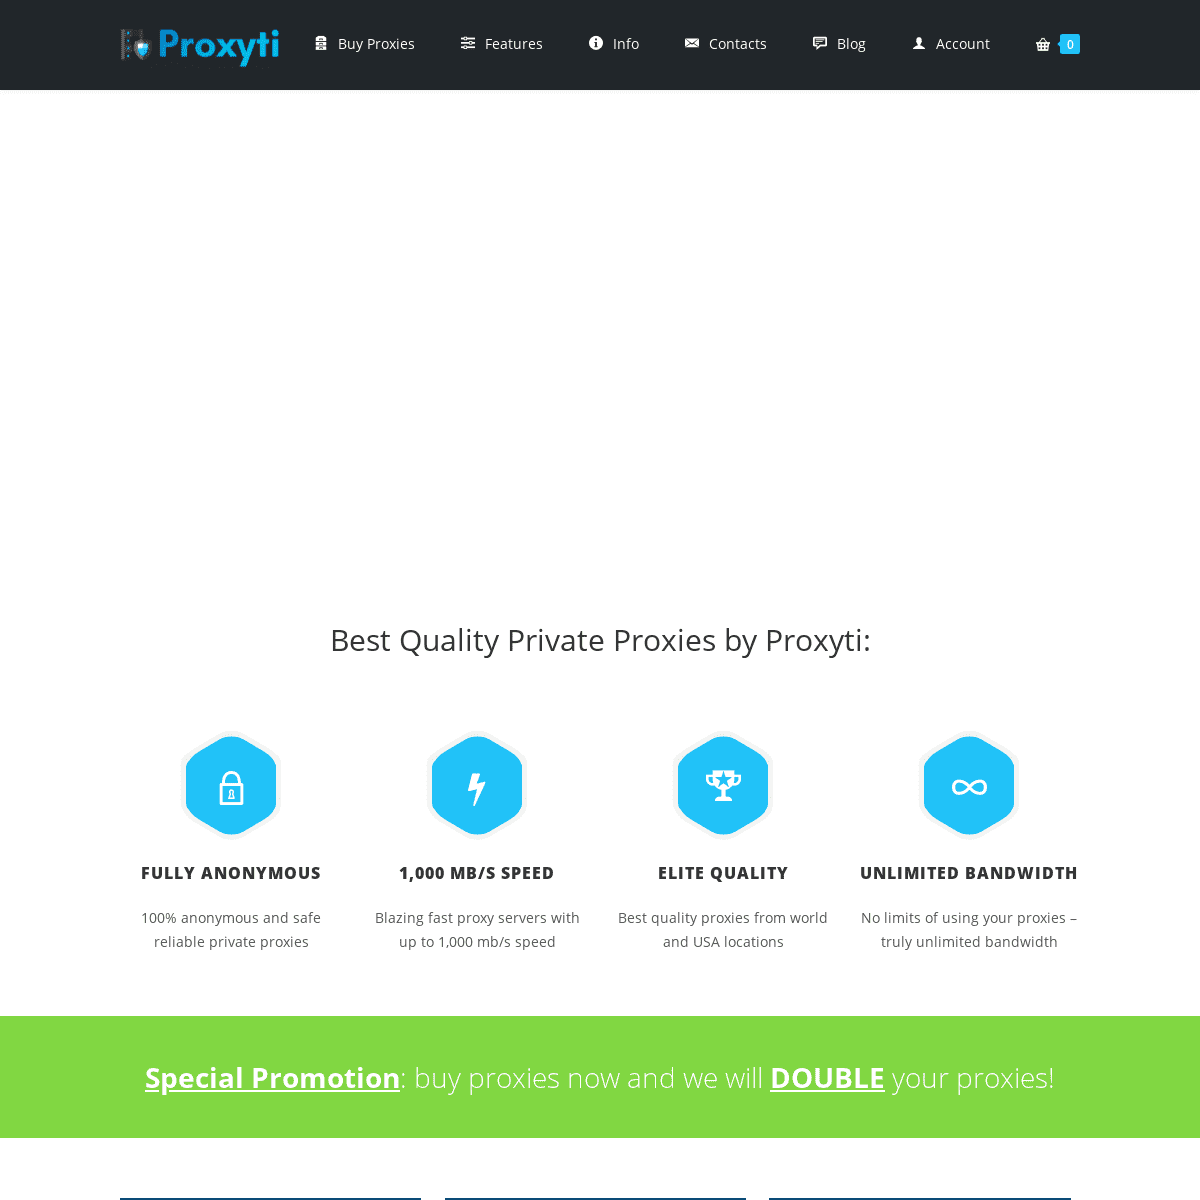 A complete backup of https://proxyti.com